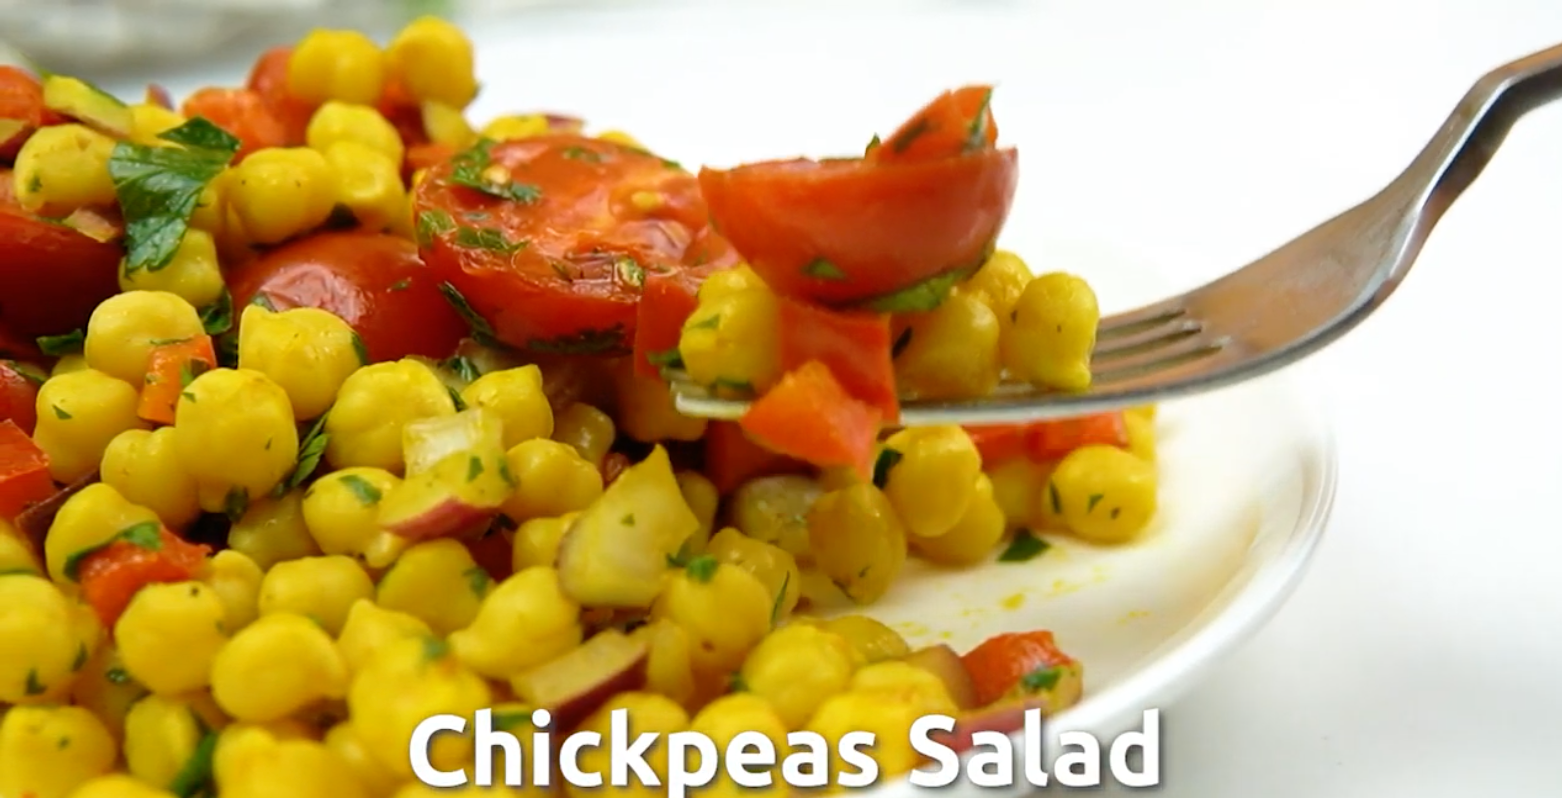 Chickpea Salad Recipe [Video] - How to cook with turmeric?